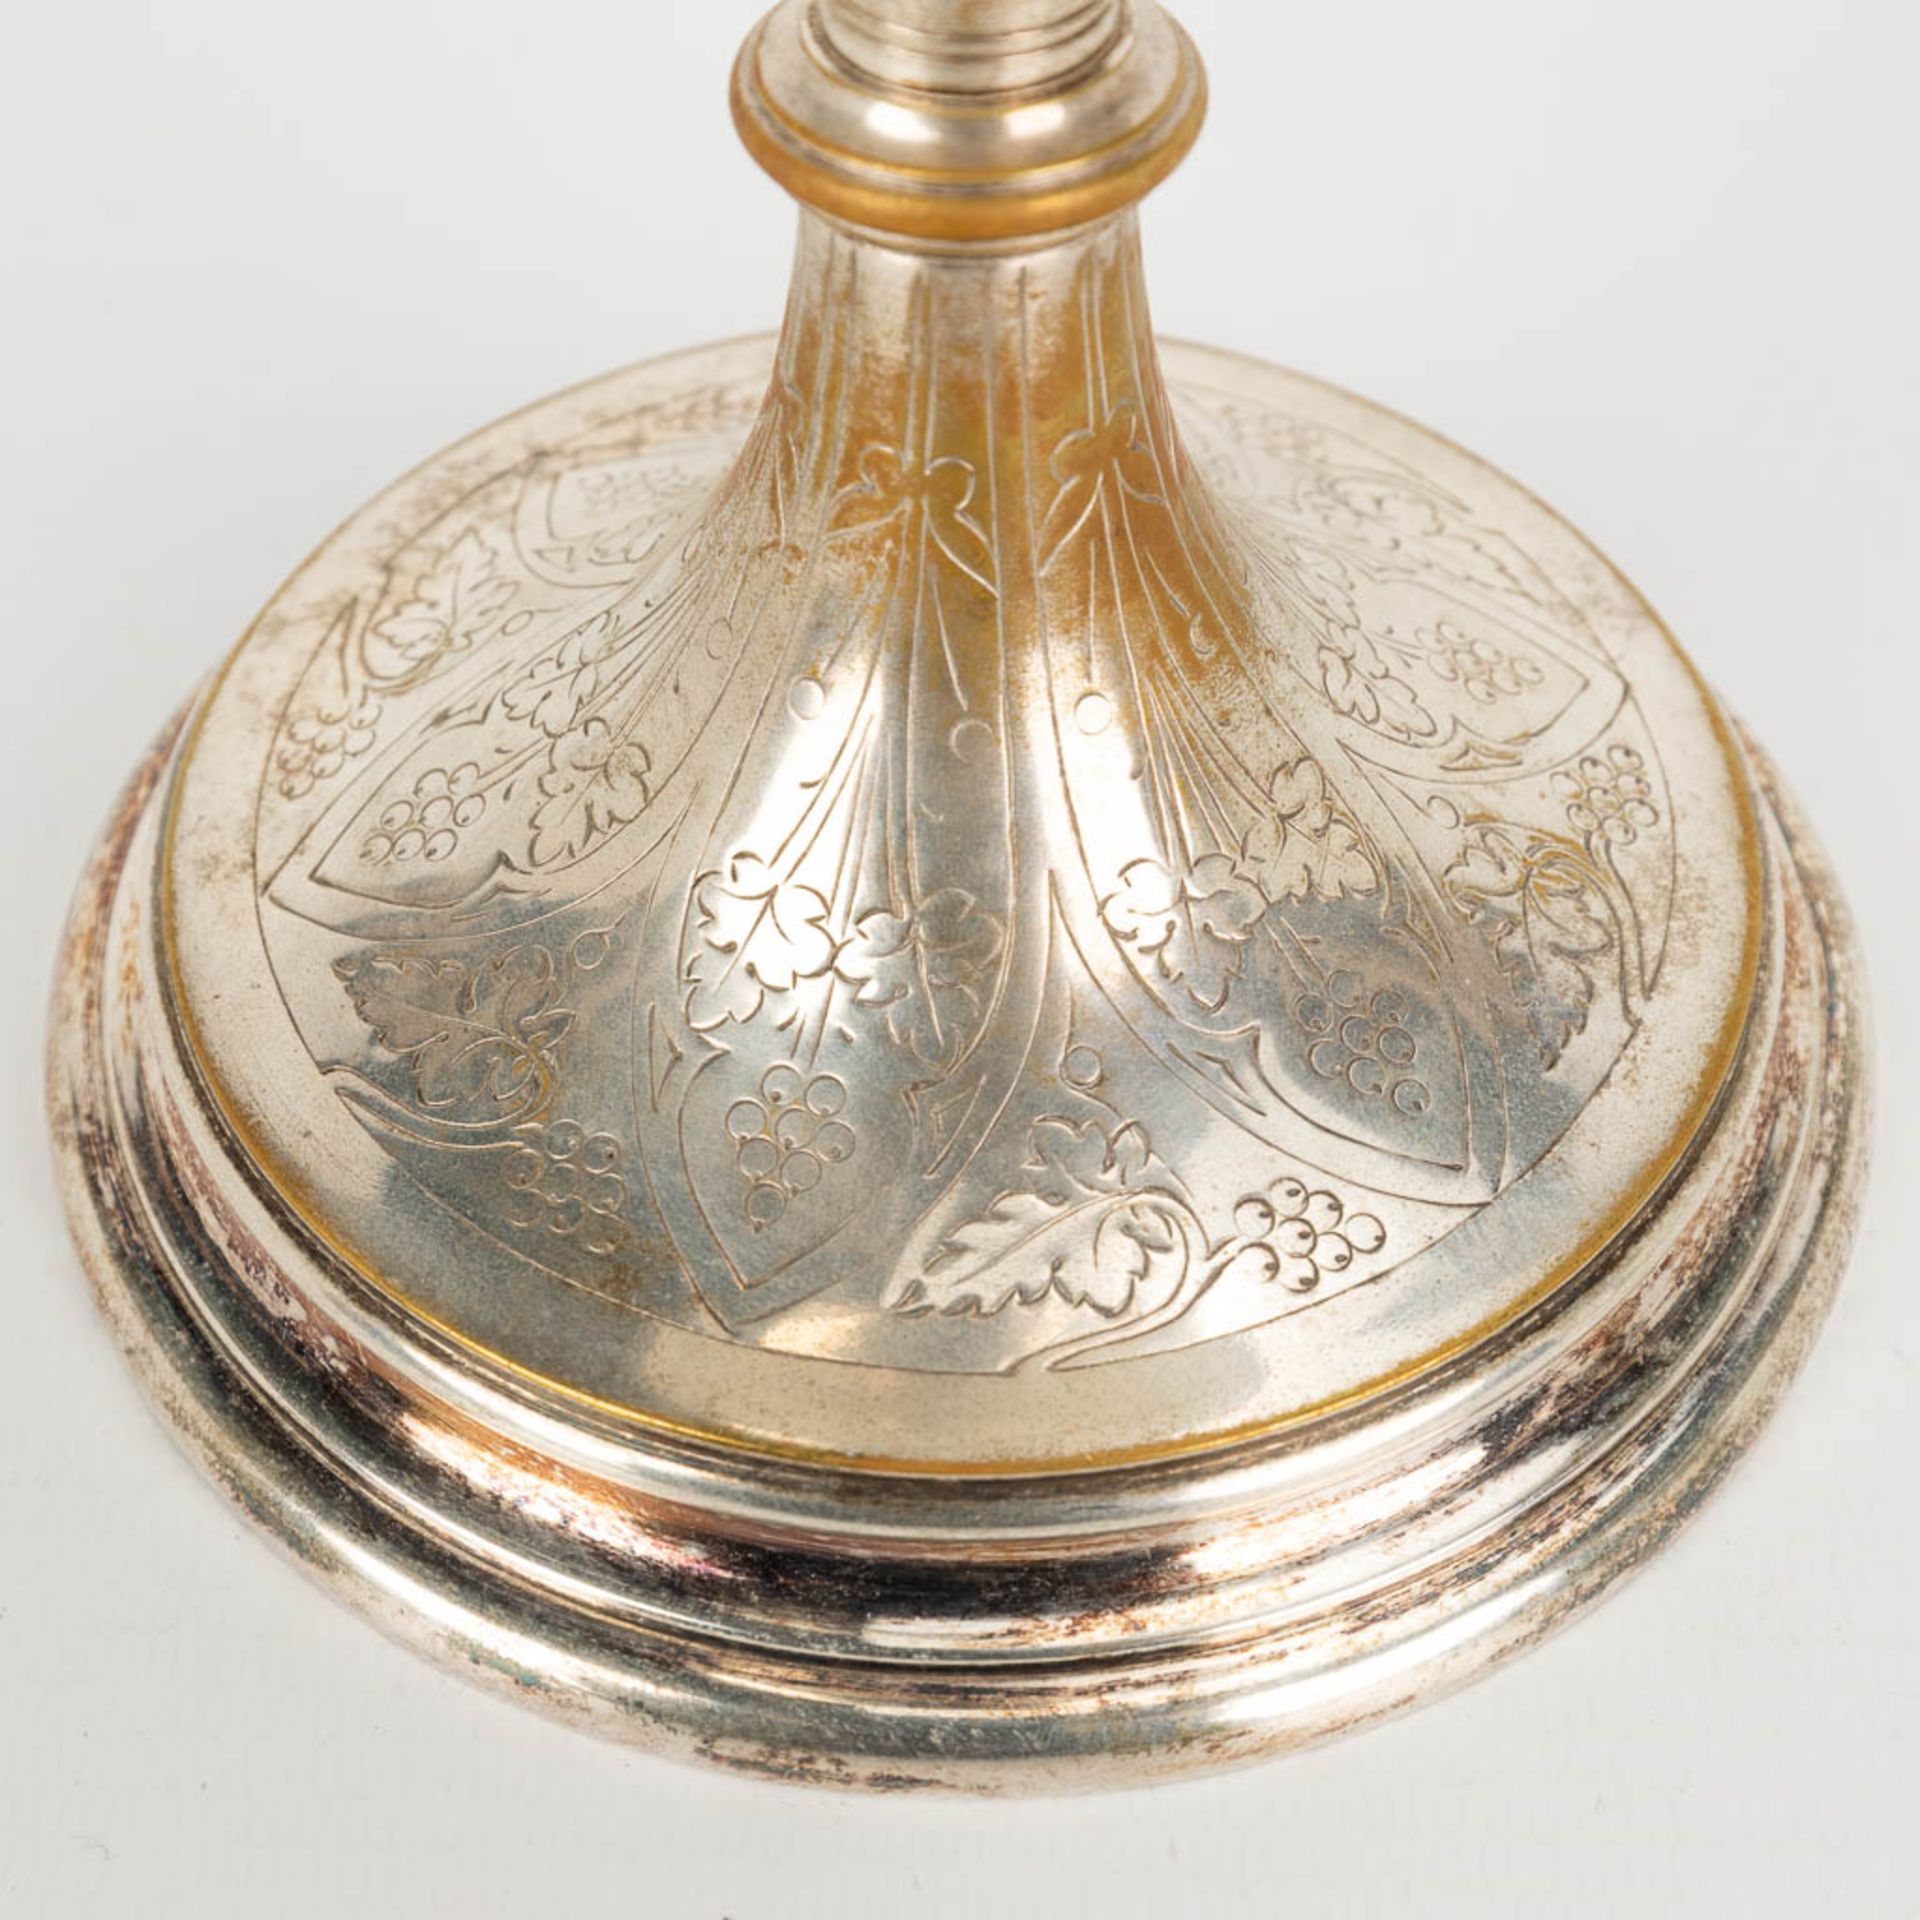 A collection of 2 silver-plated ciboria, gothic revival. (H:28cm) - Image 7 of 13